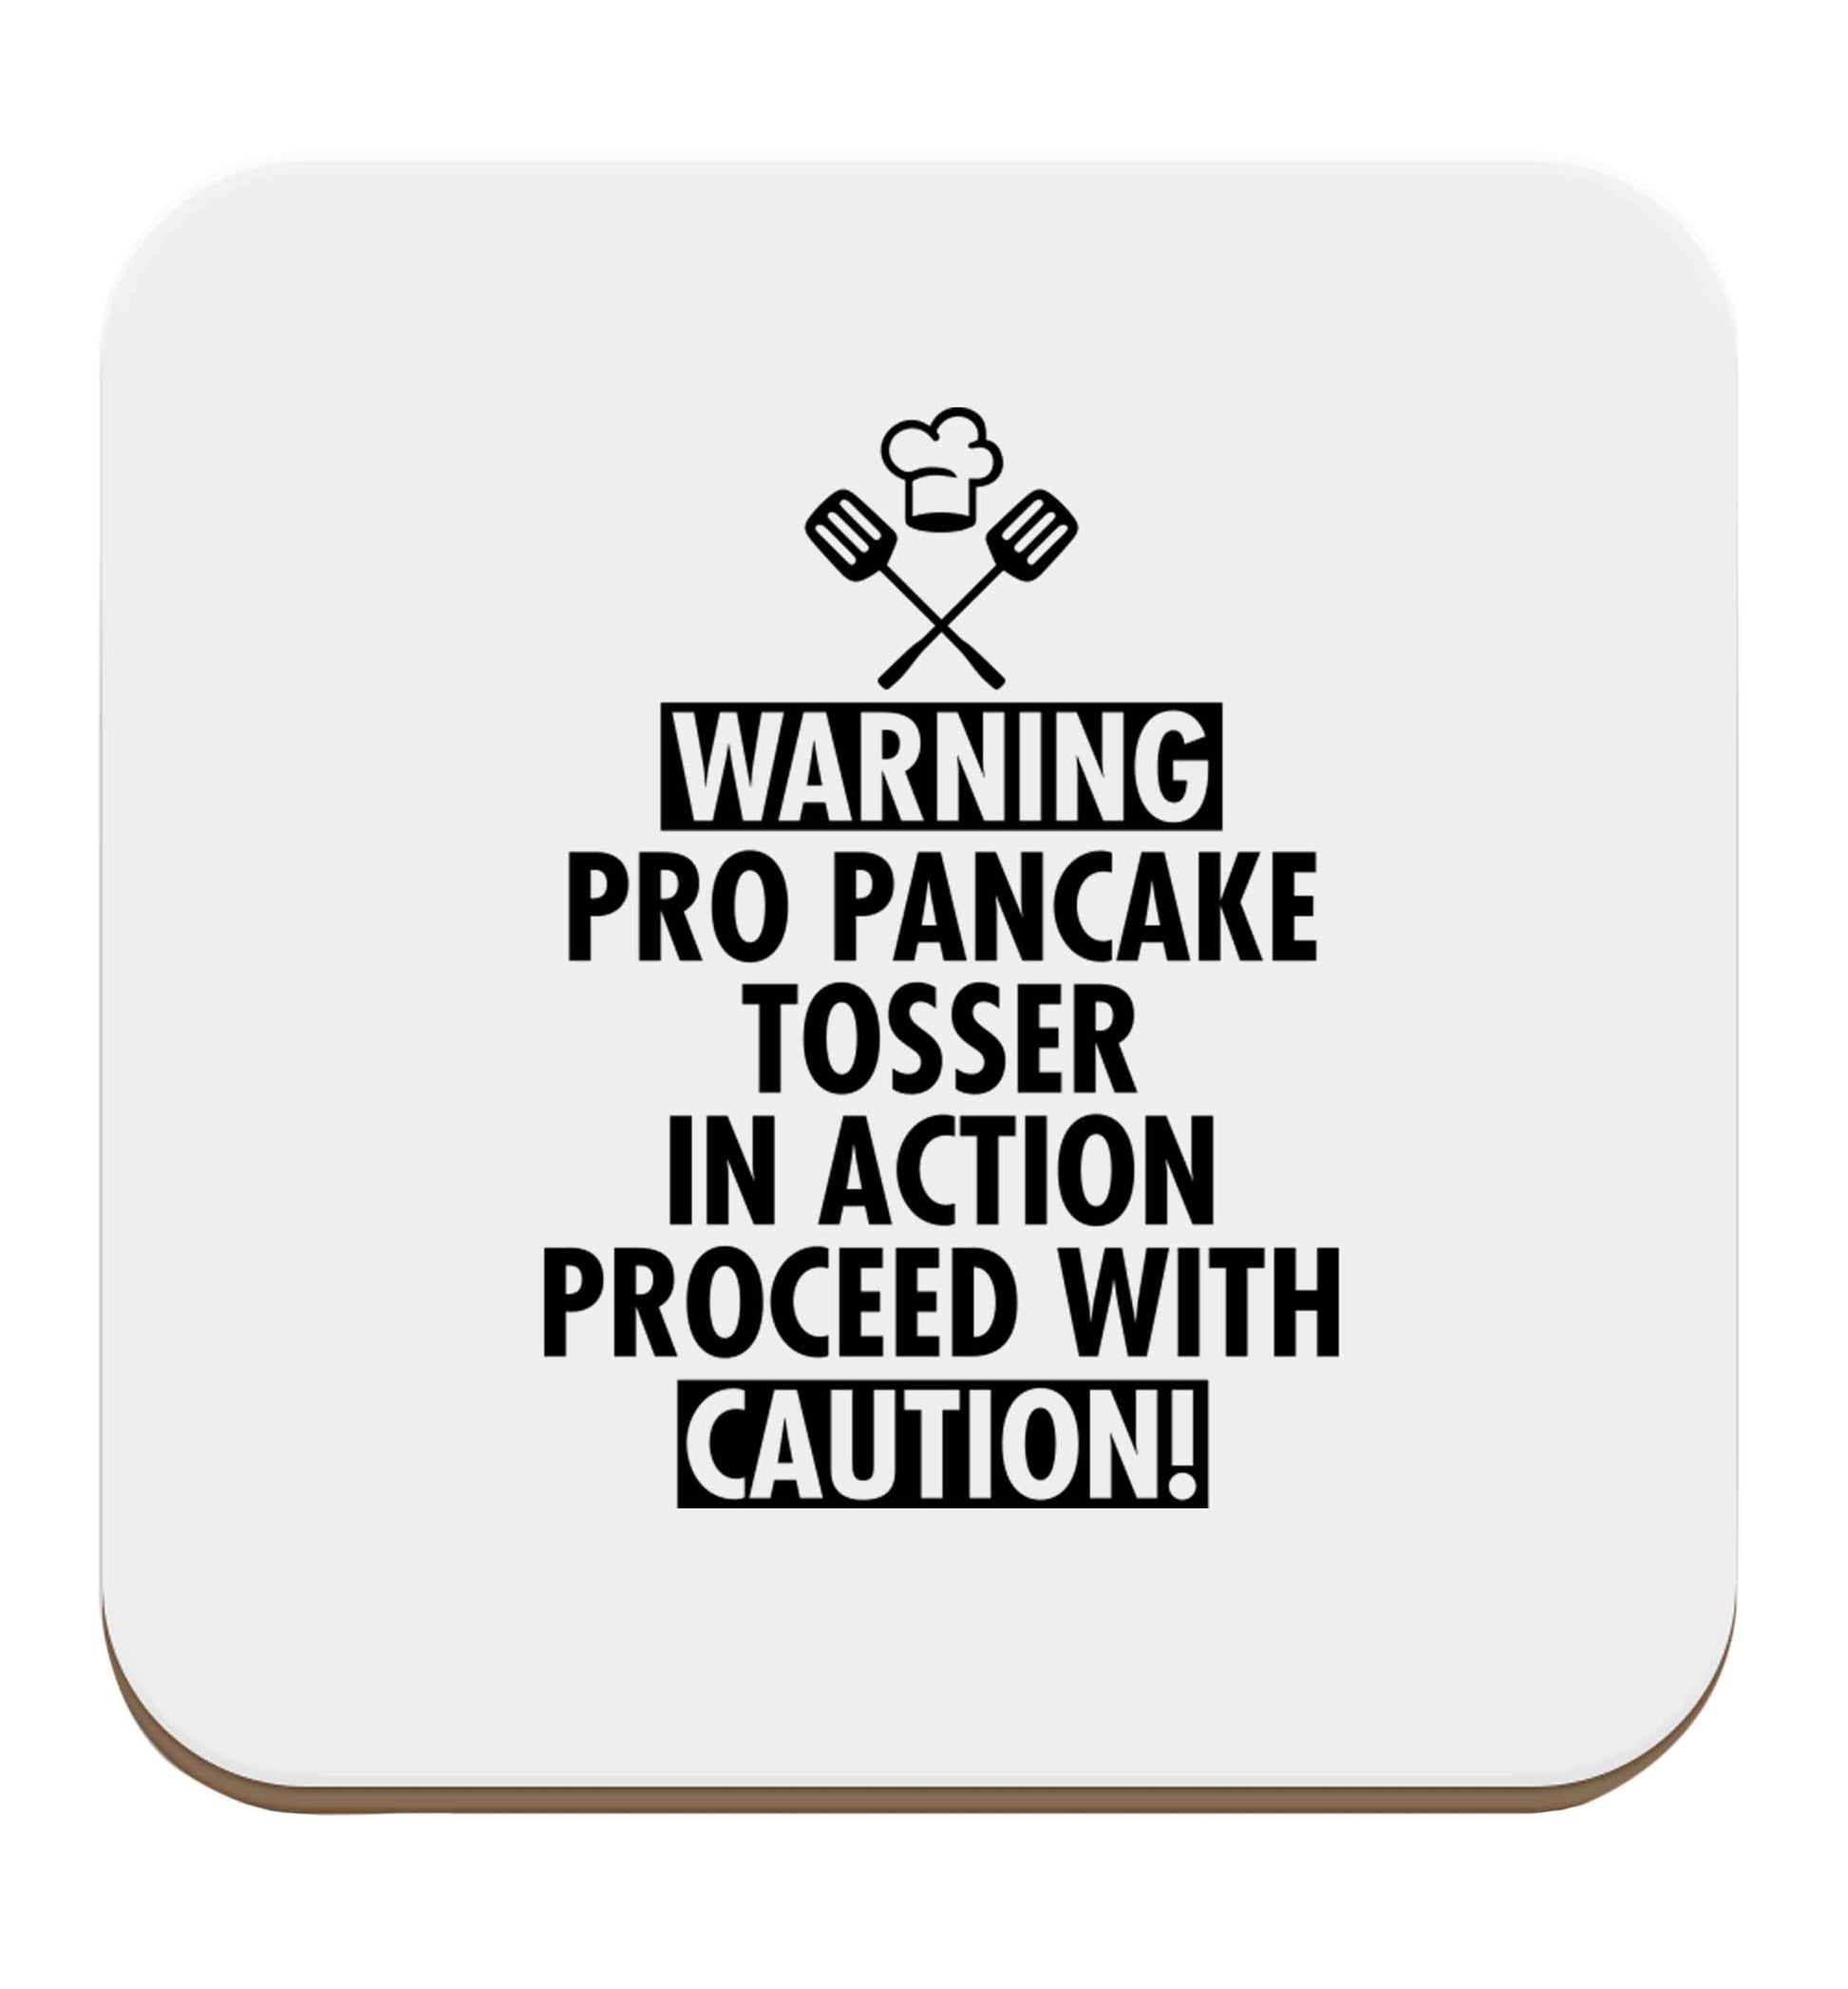 Warning pro pancake tosser in action proceed with caution set of four coasters